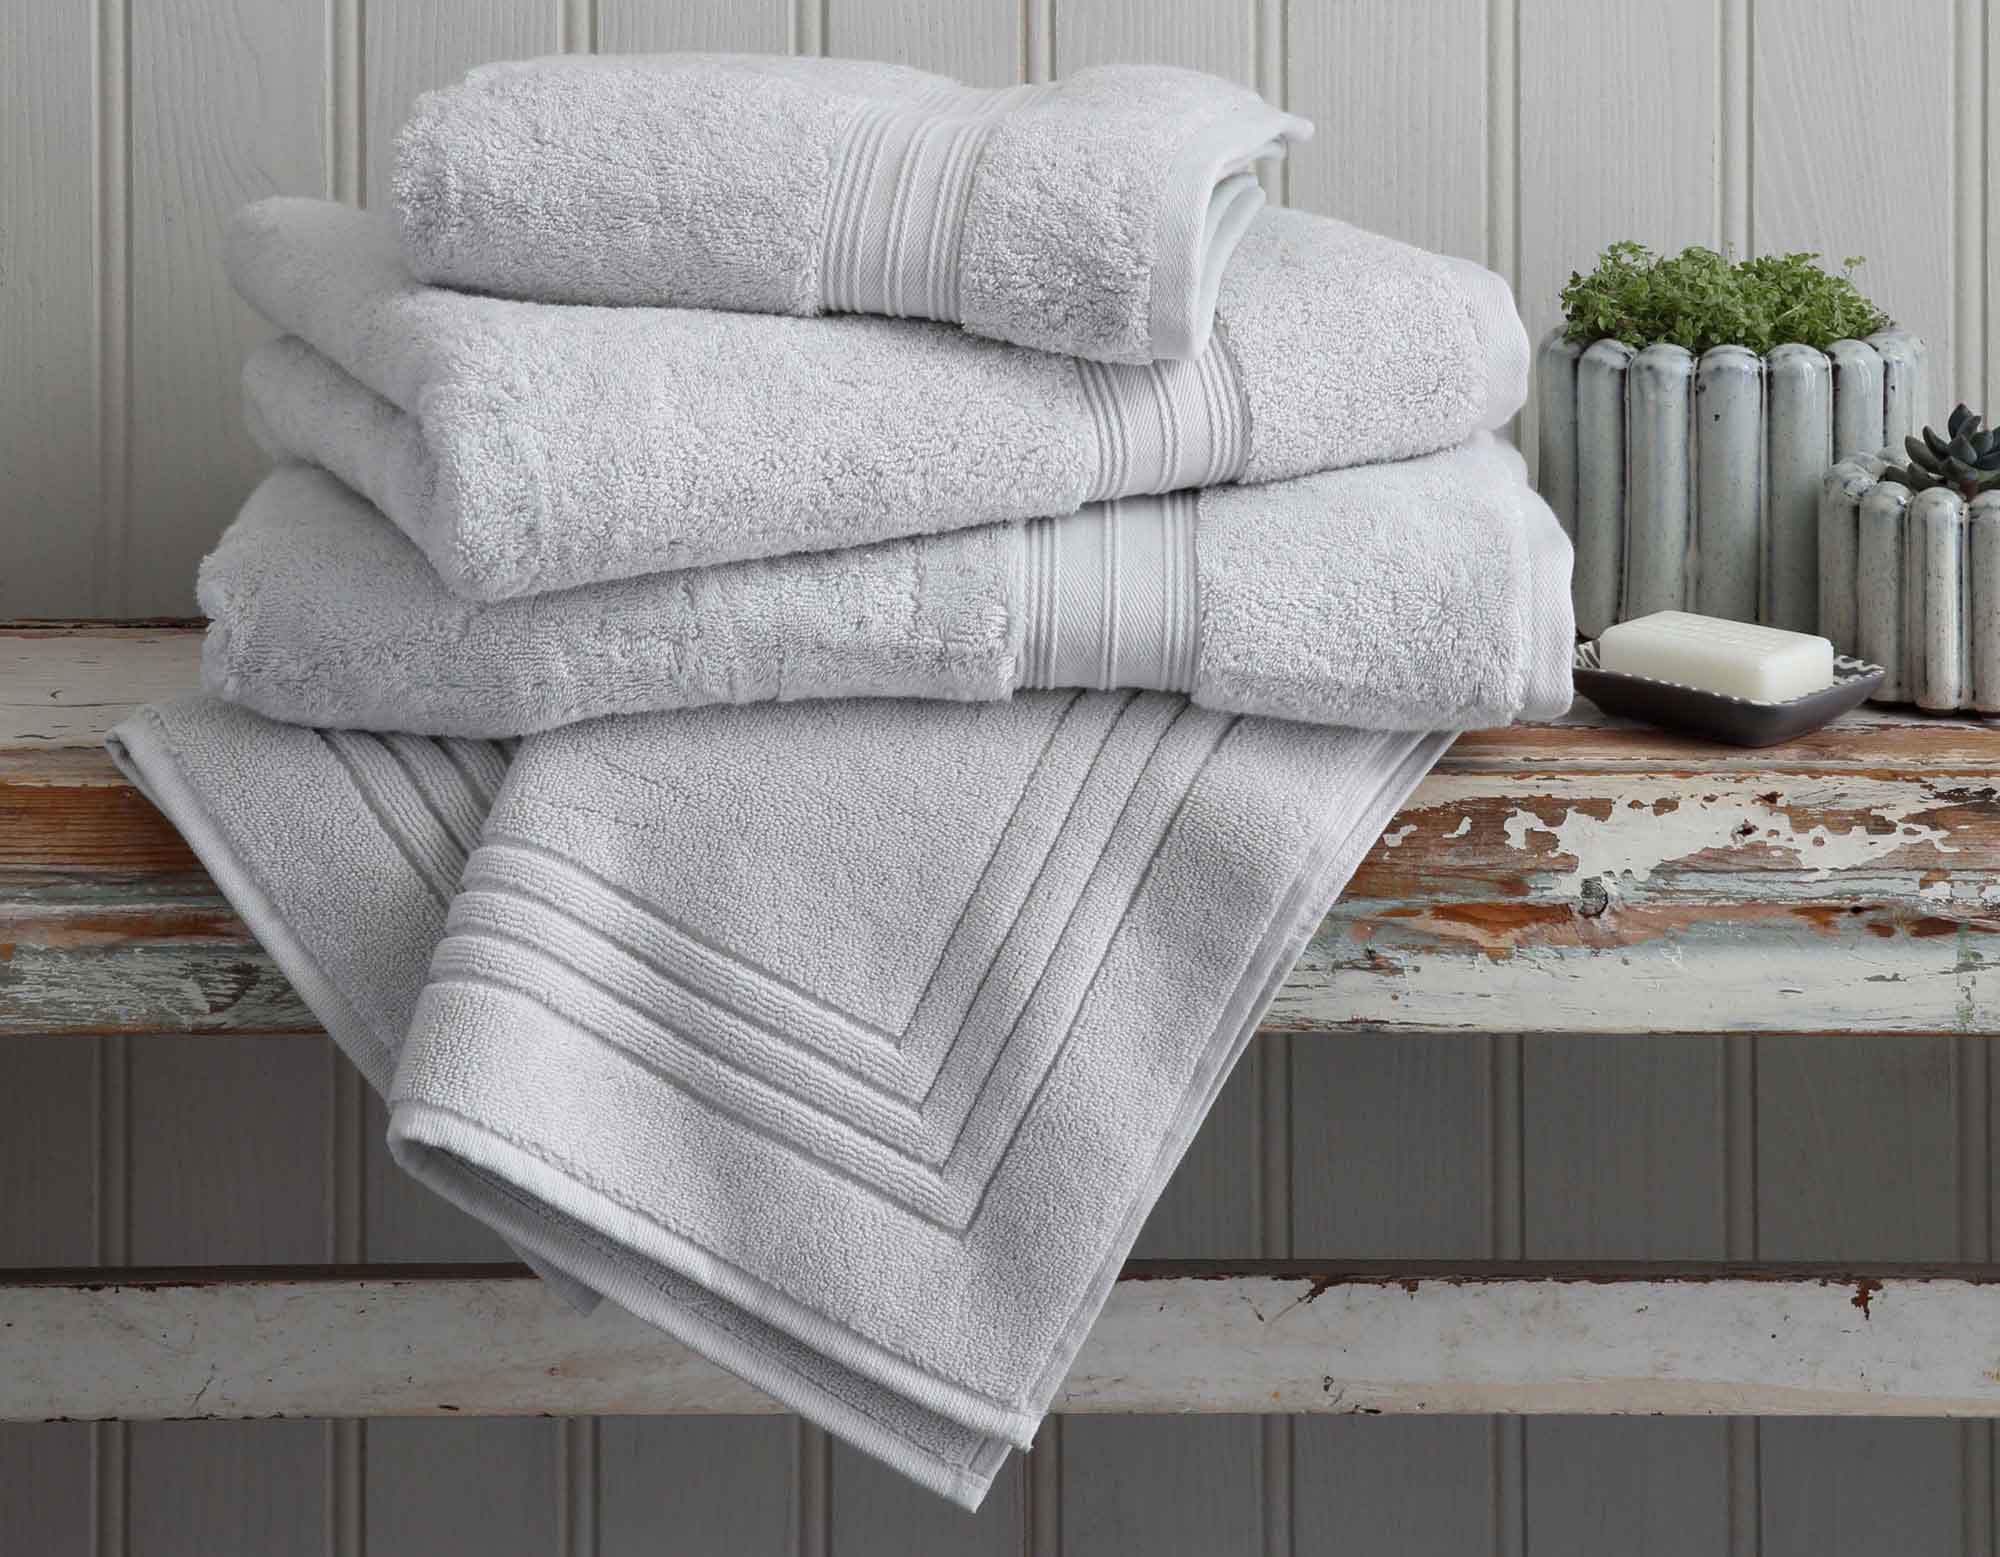 Bundle of pearl grey towels and bath mat on rustic bench with soap